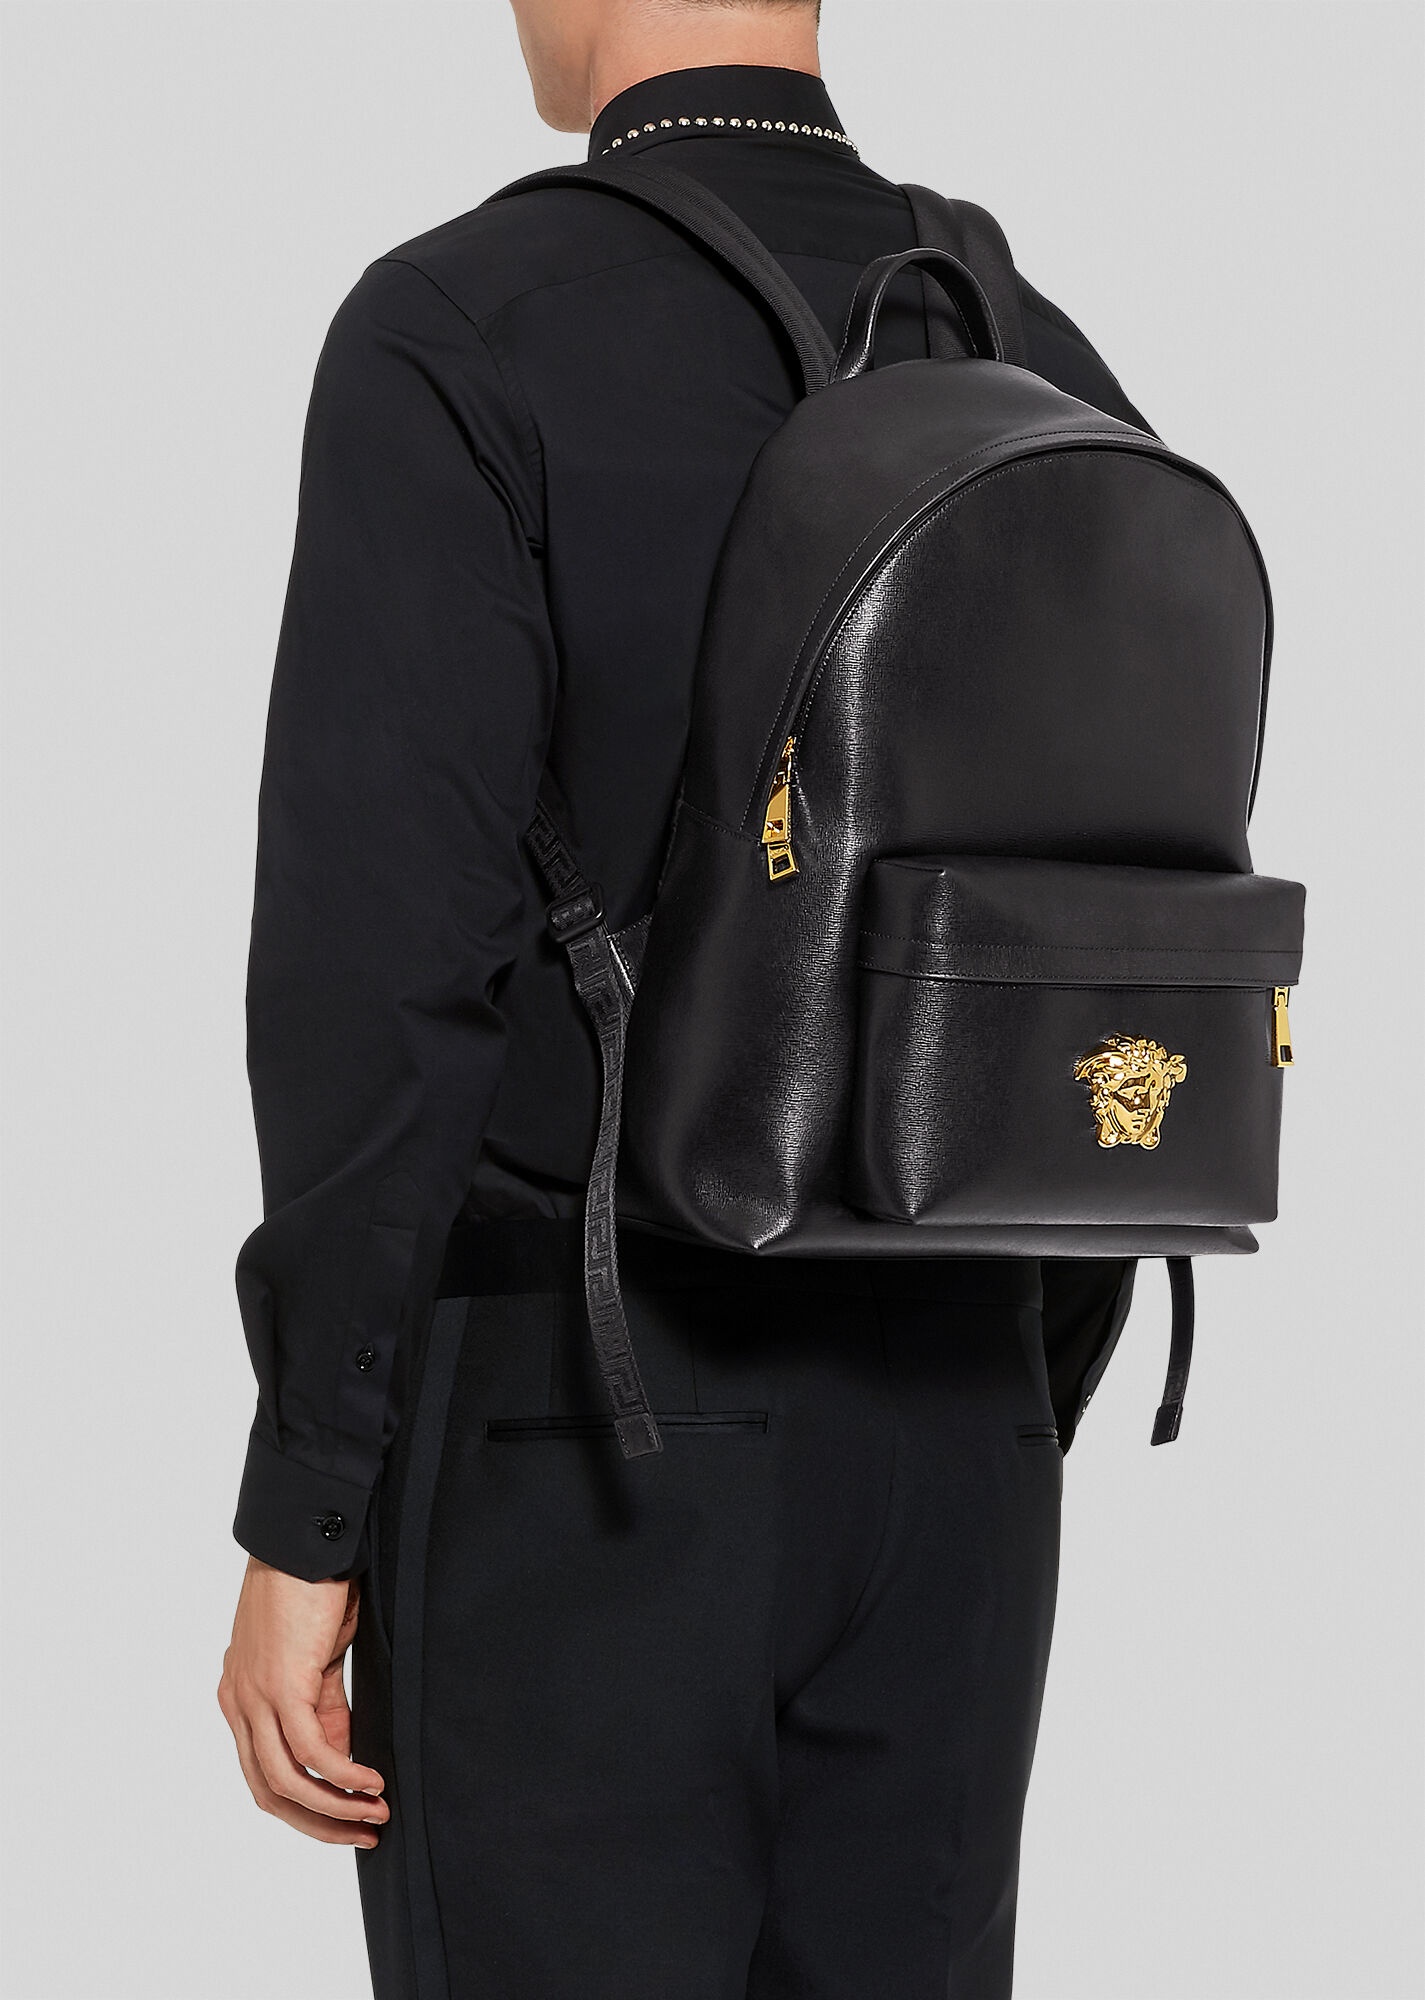 Saffiano Leather Palazzo Backpack - 4